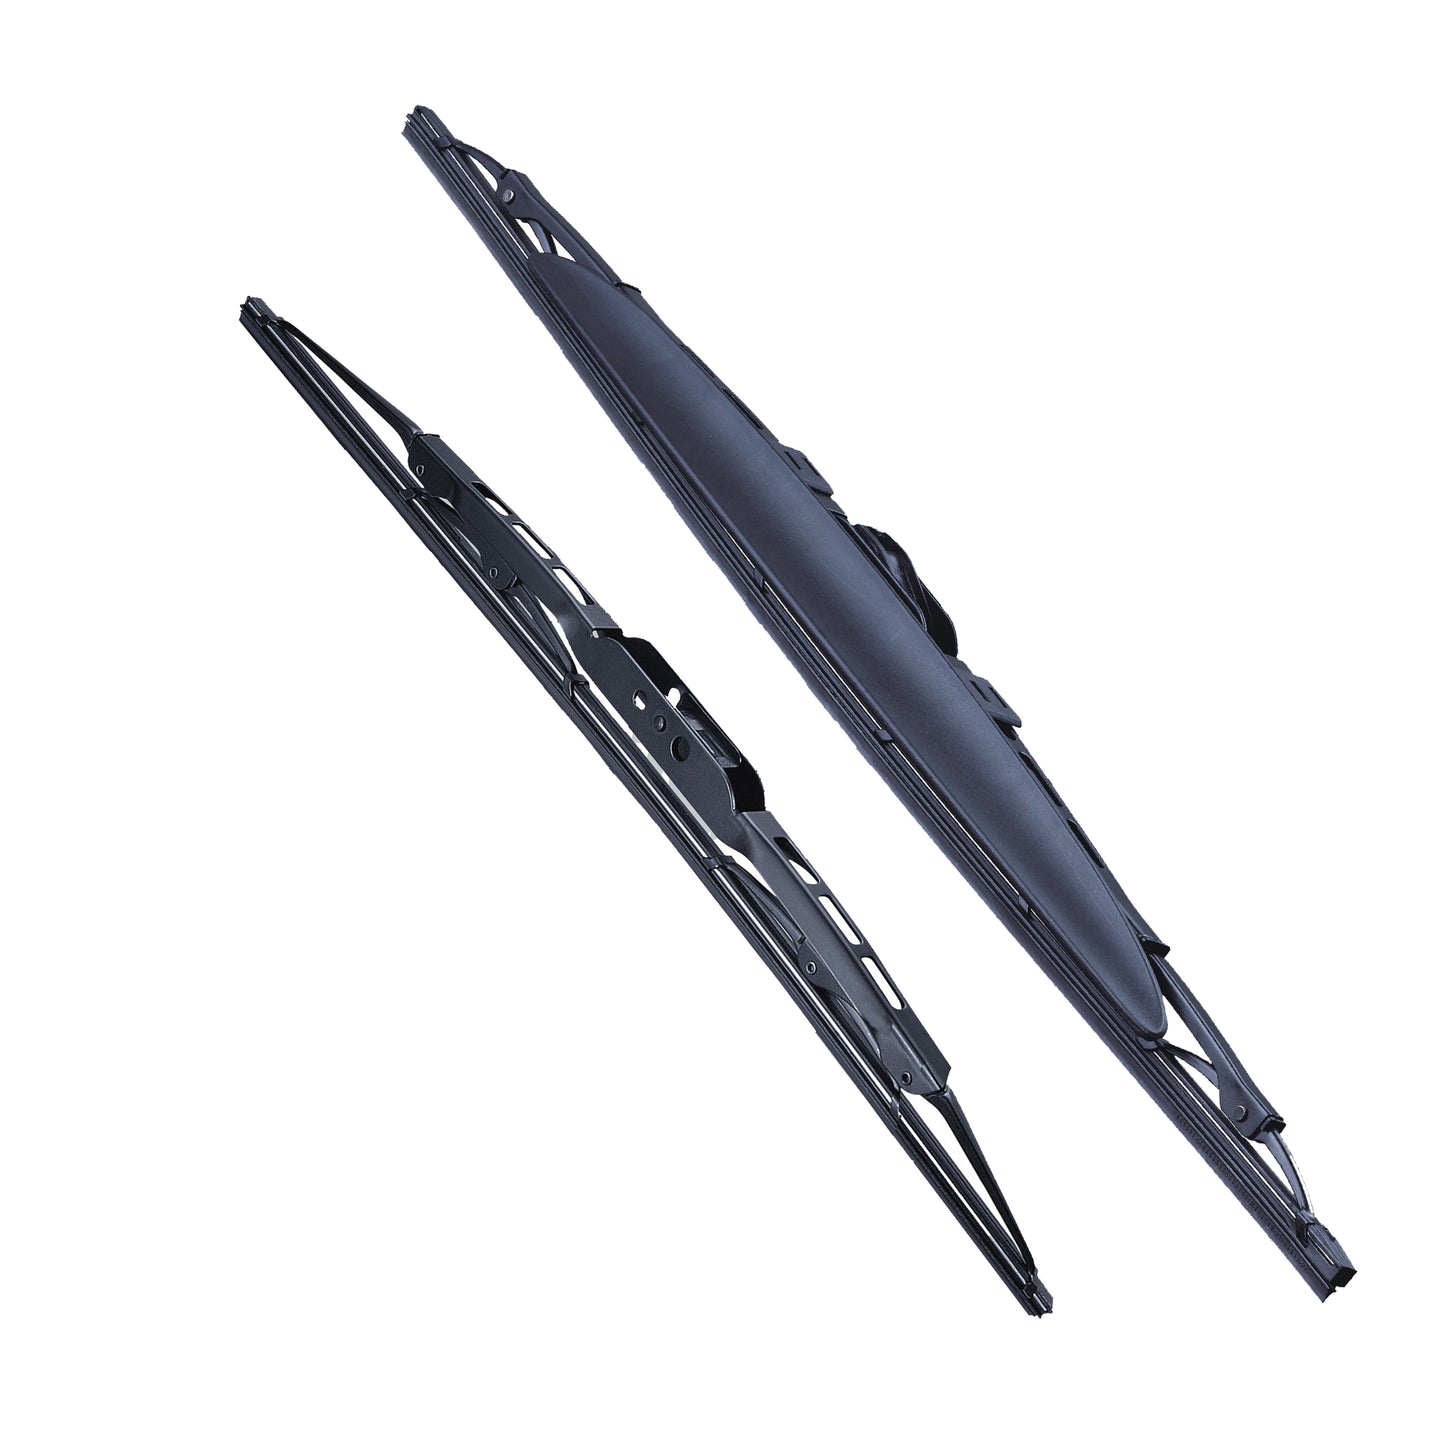 VAUXHALL ASTRA Convertible Mar 2001 to Oct 2005 Wiper Blade Kit